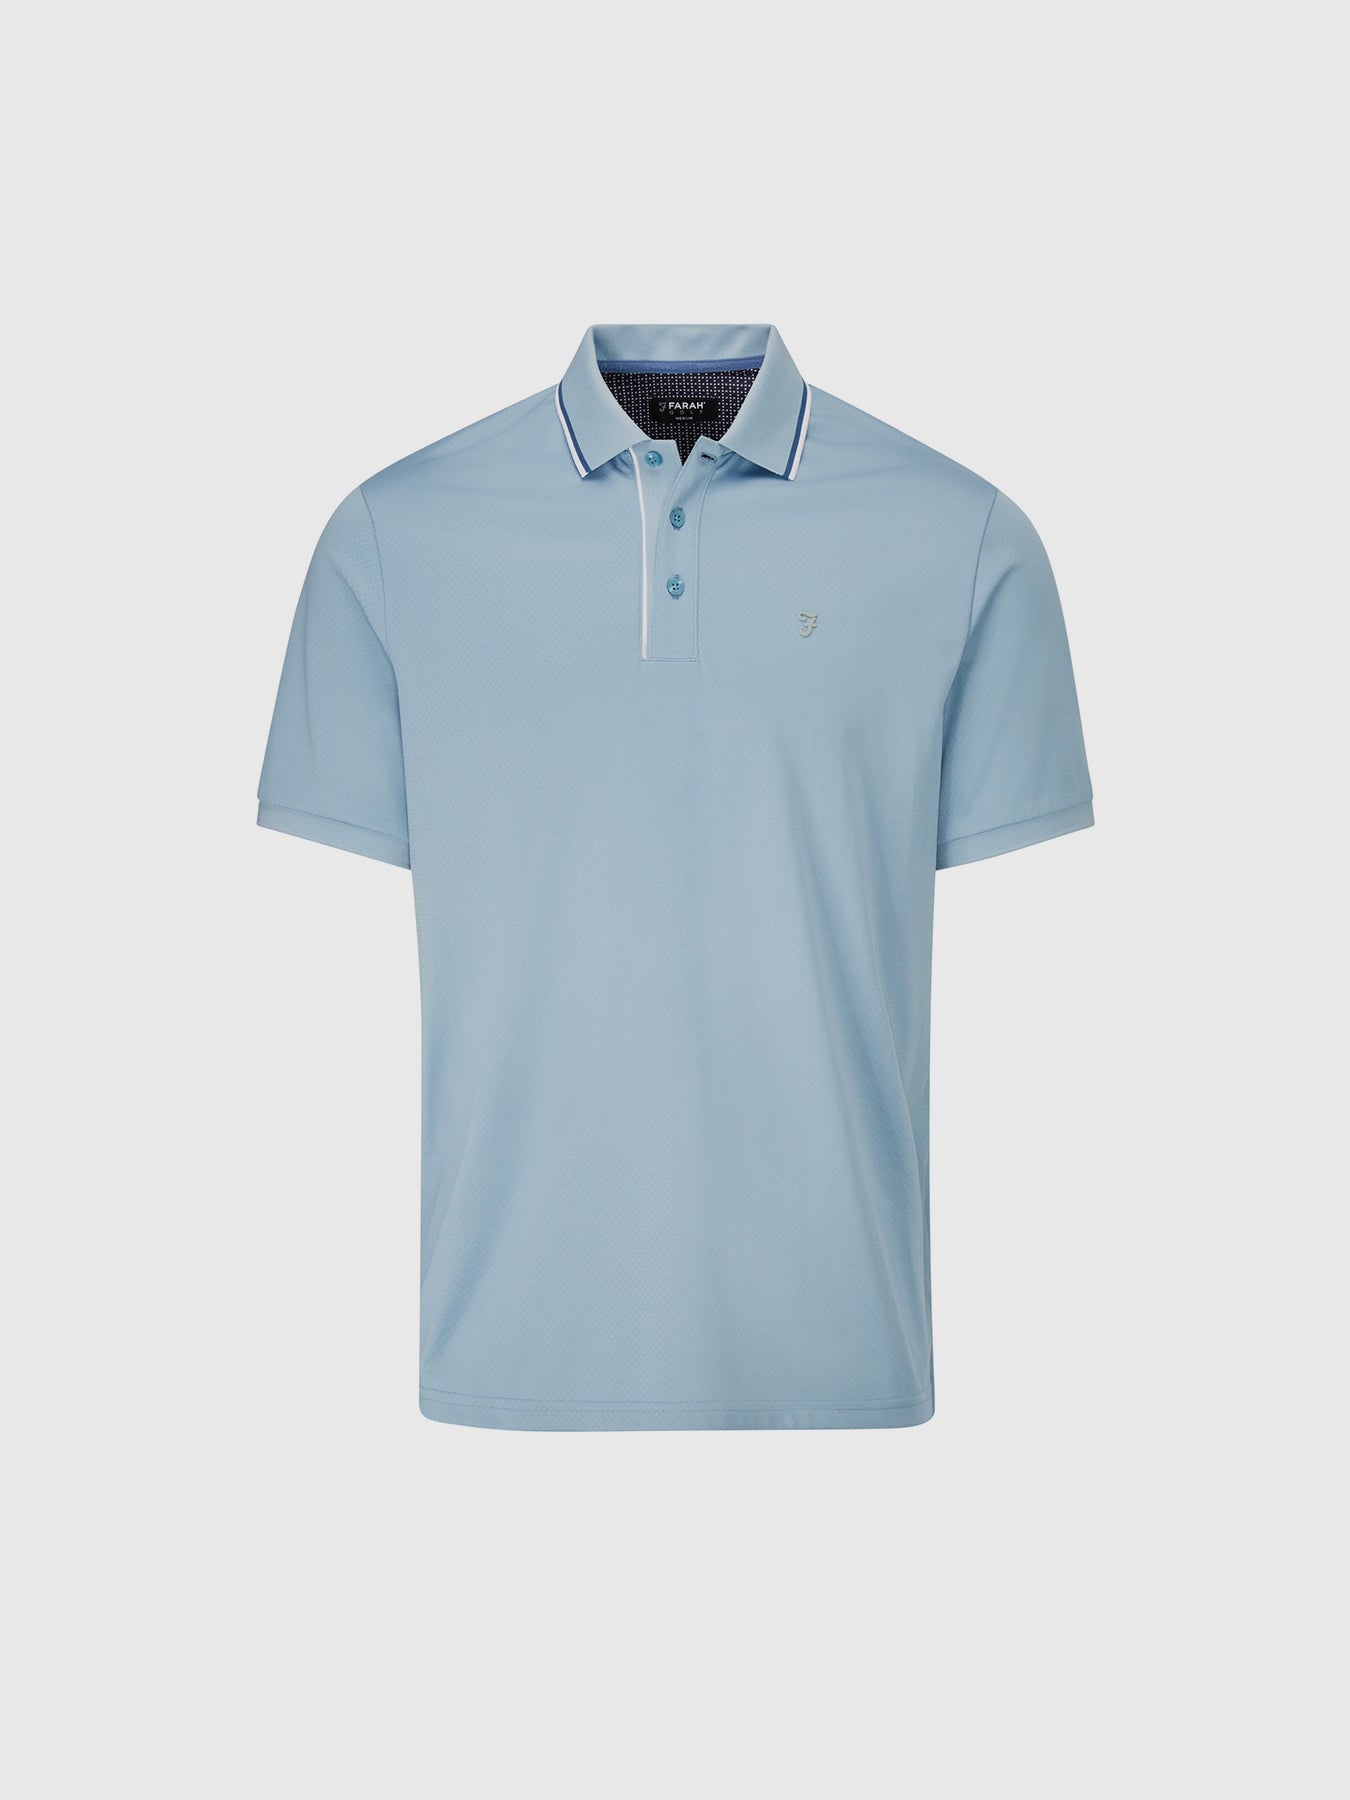 View Hoxie Golf Polo Shirt In Blue Grey information